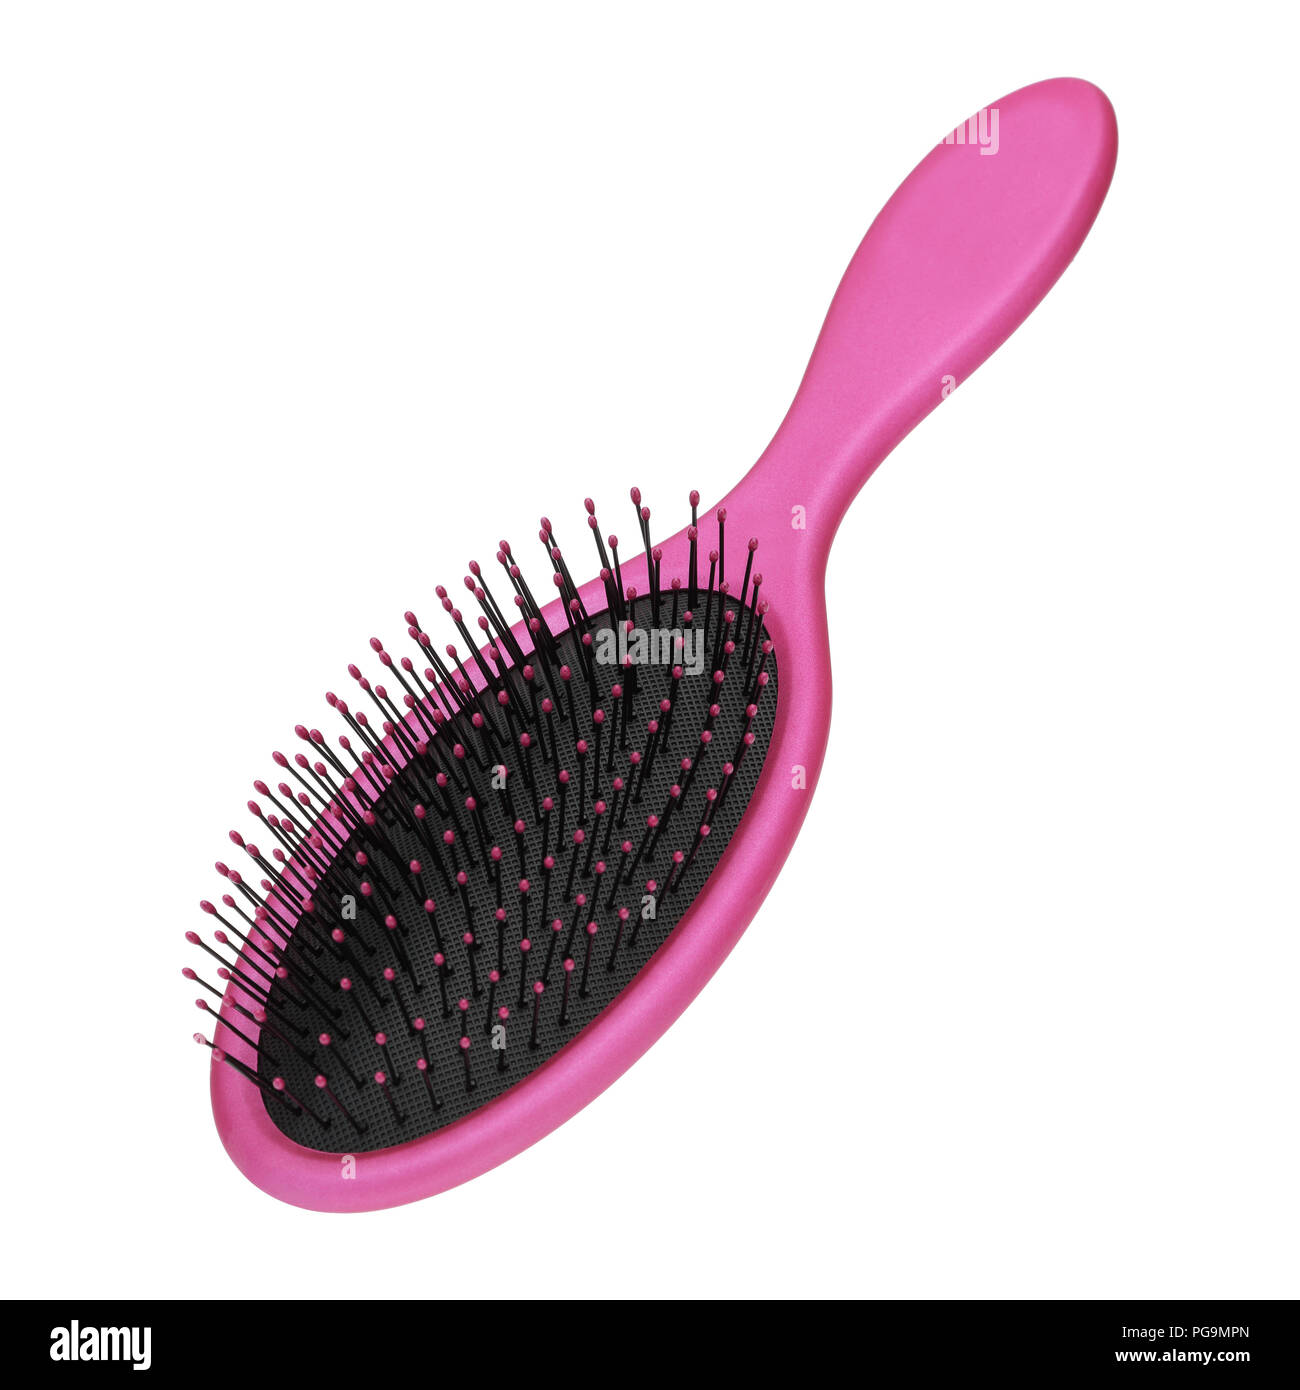 Pink and black hair brush on white background Stock Photo